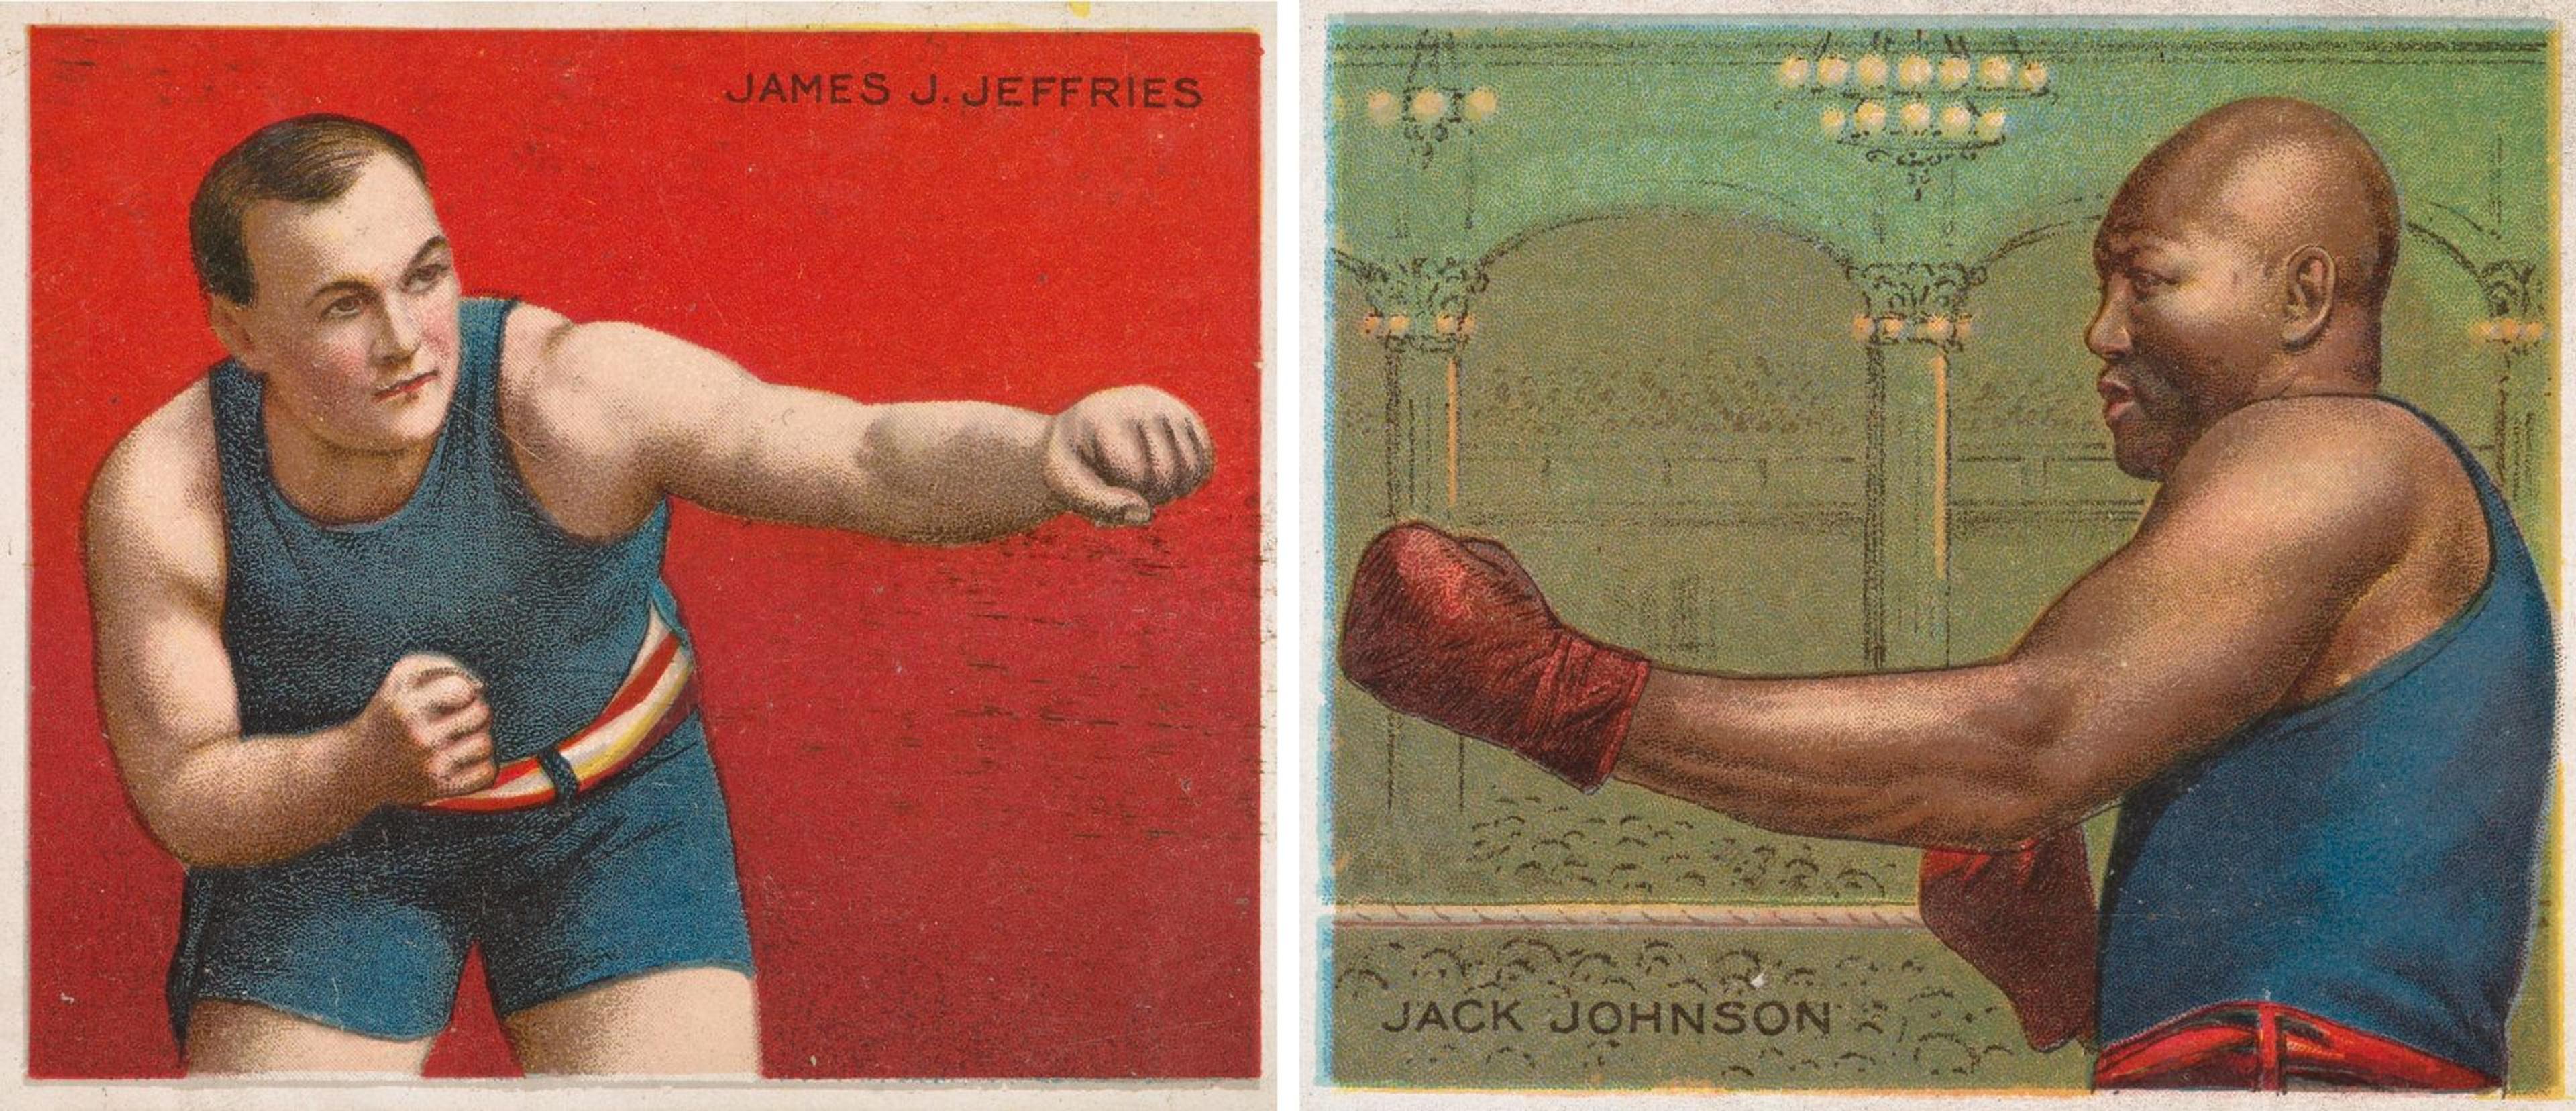 Vintage boxing cards from the early 20th century depicting Jack Johnson (right) and James Jeffries (left)